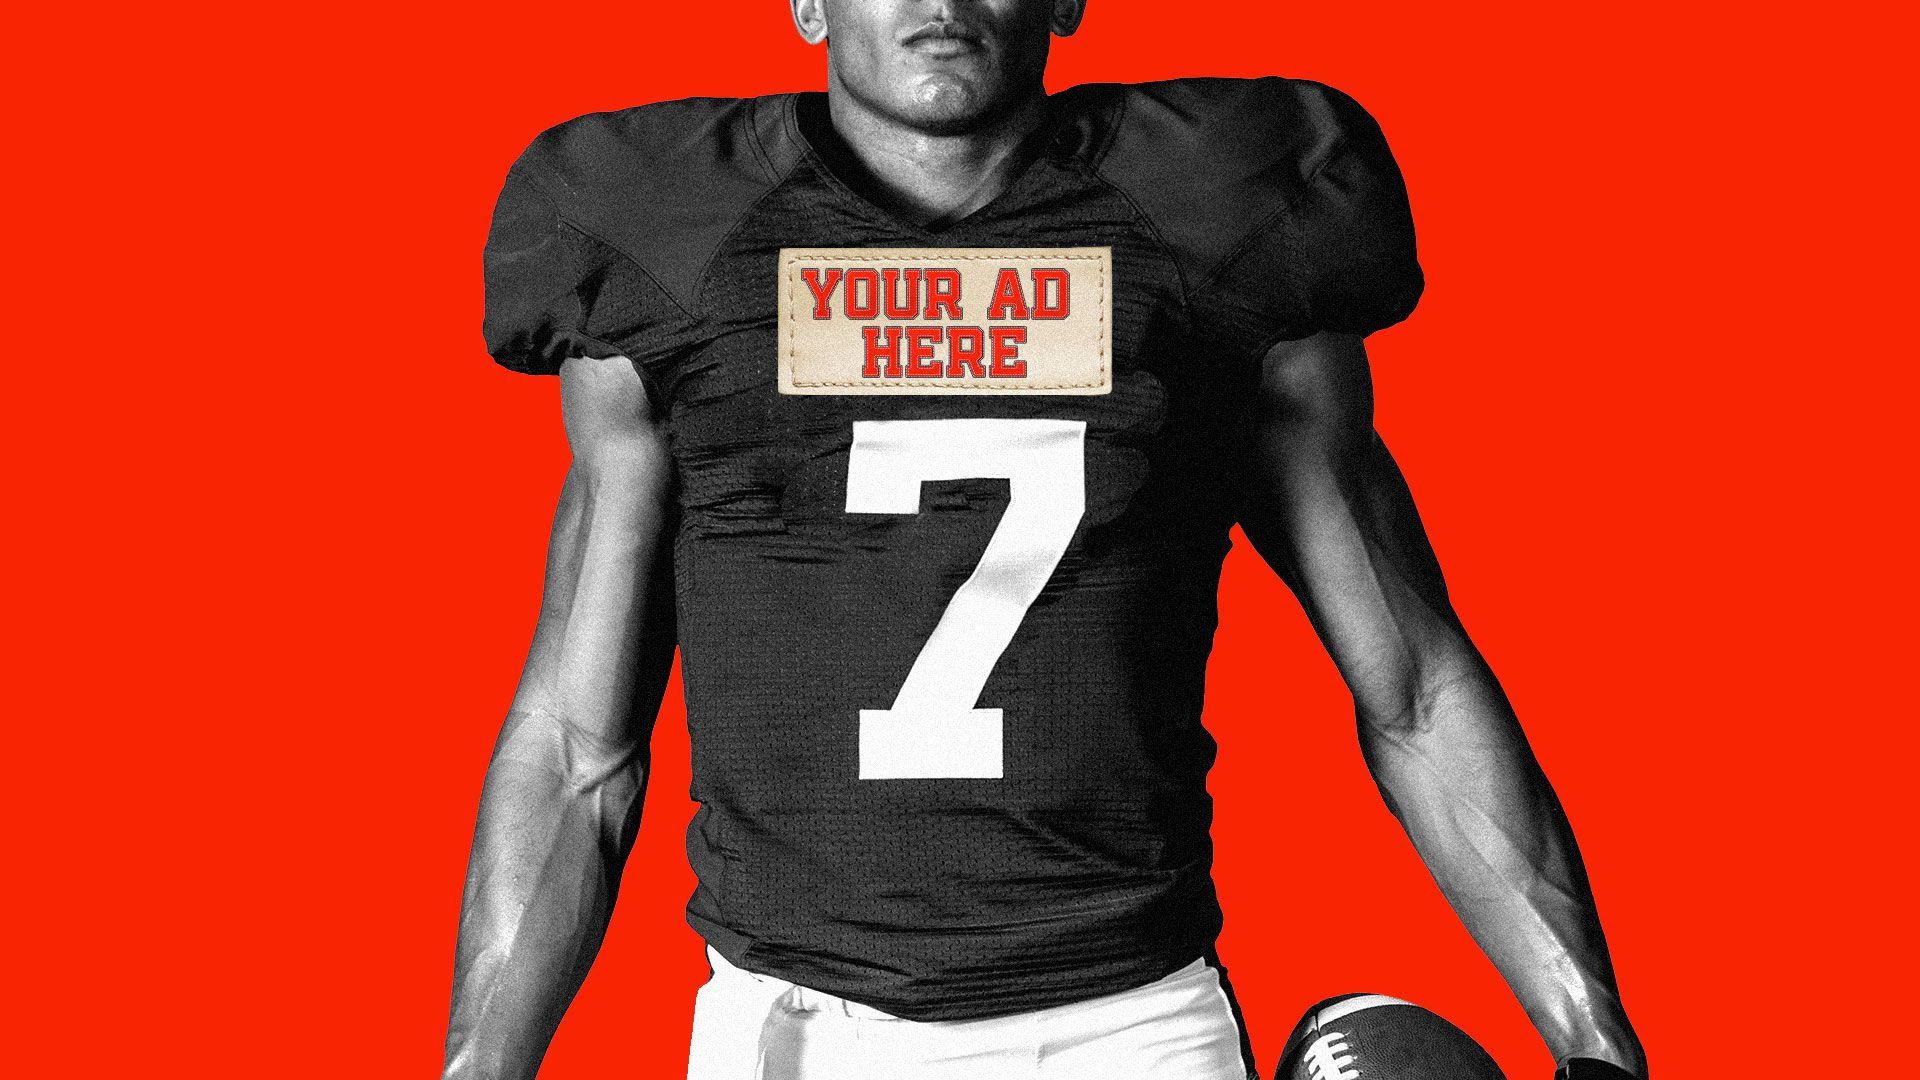 Illustration of a footbal player with jersey that says your ad here